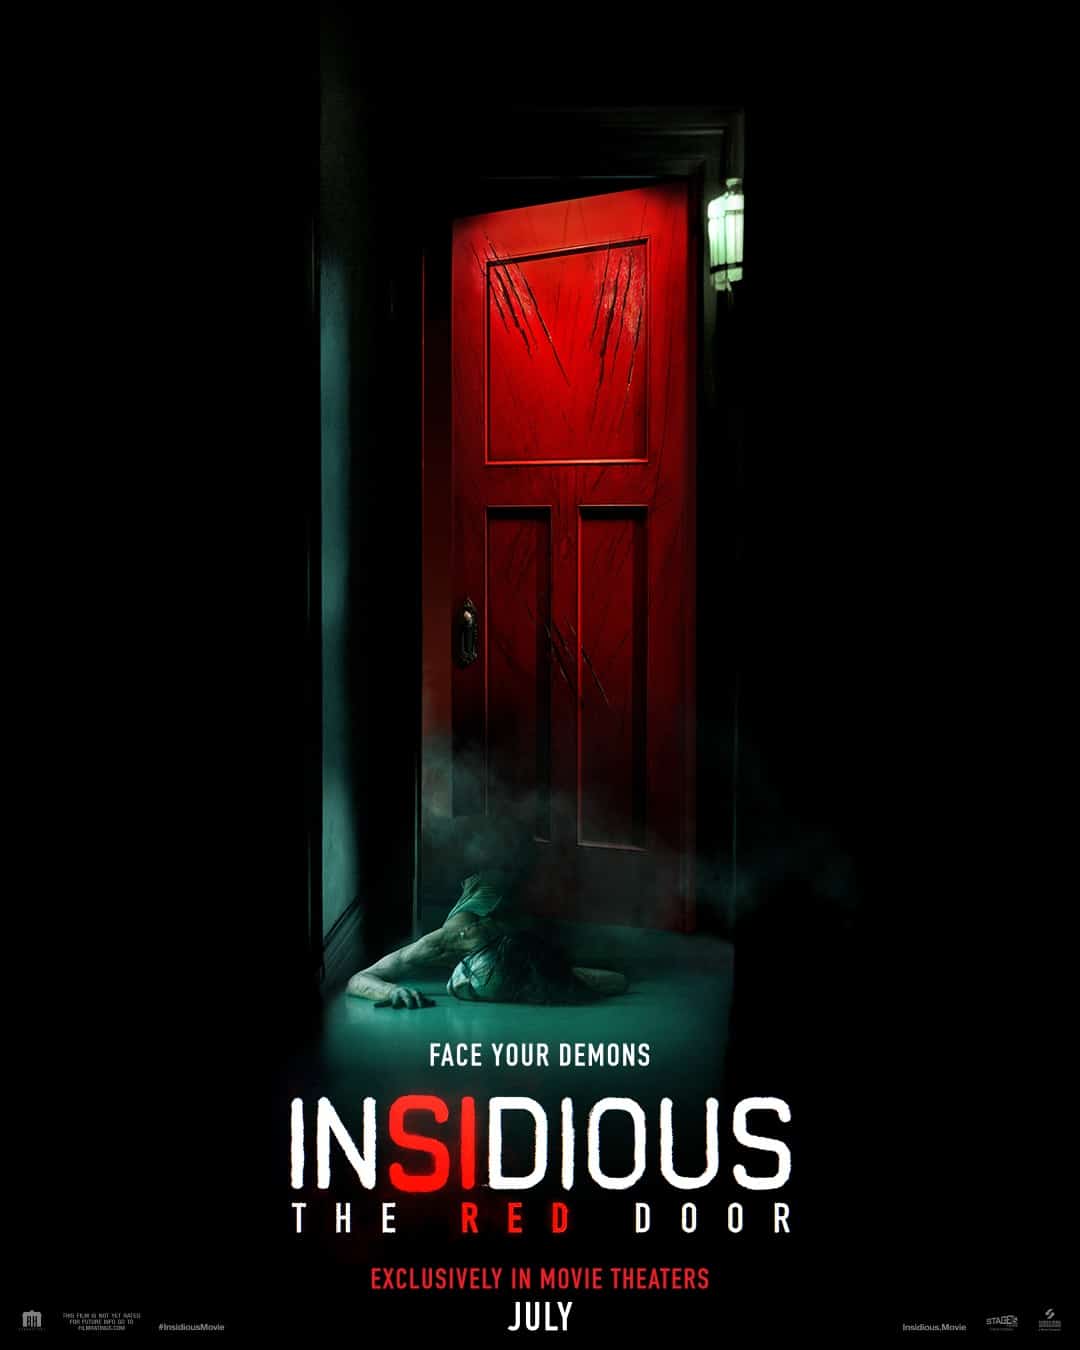 Insidious: The Red Door extended trailer was shown at CinemaCon